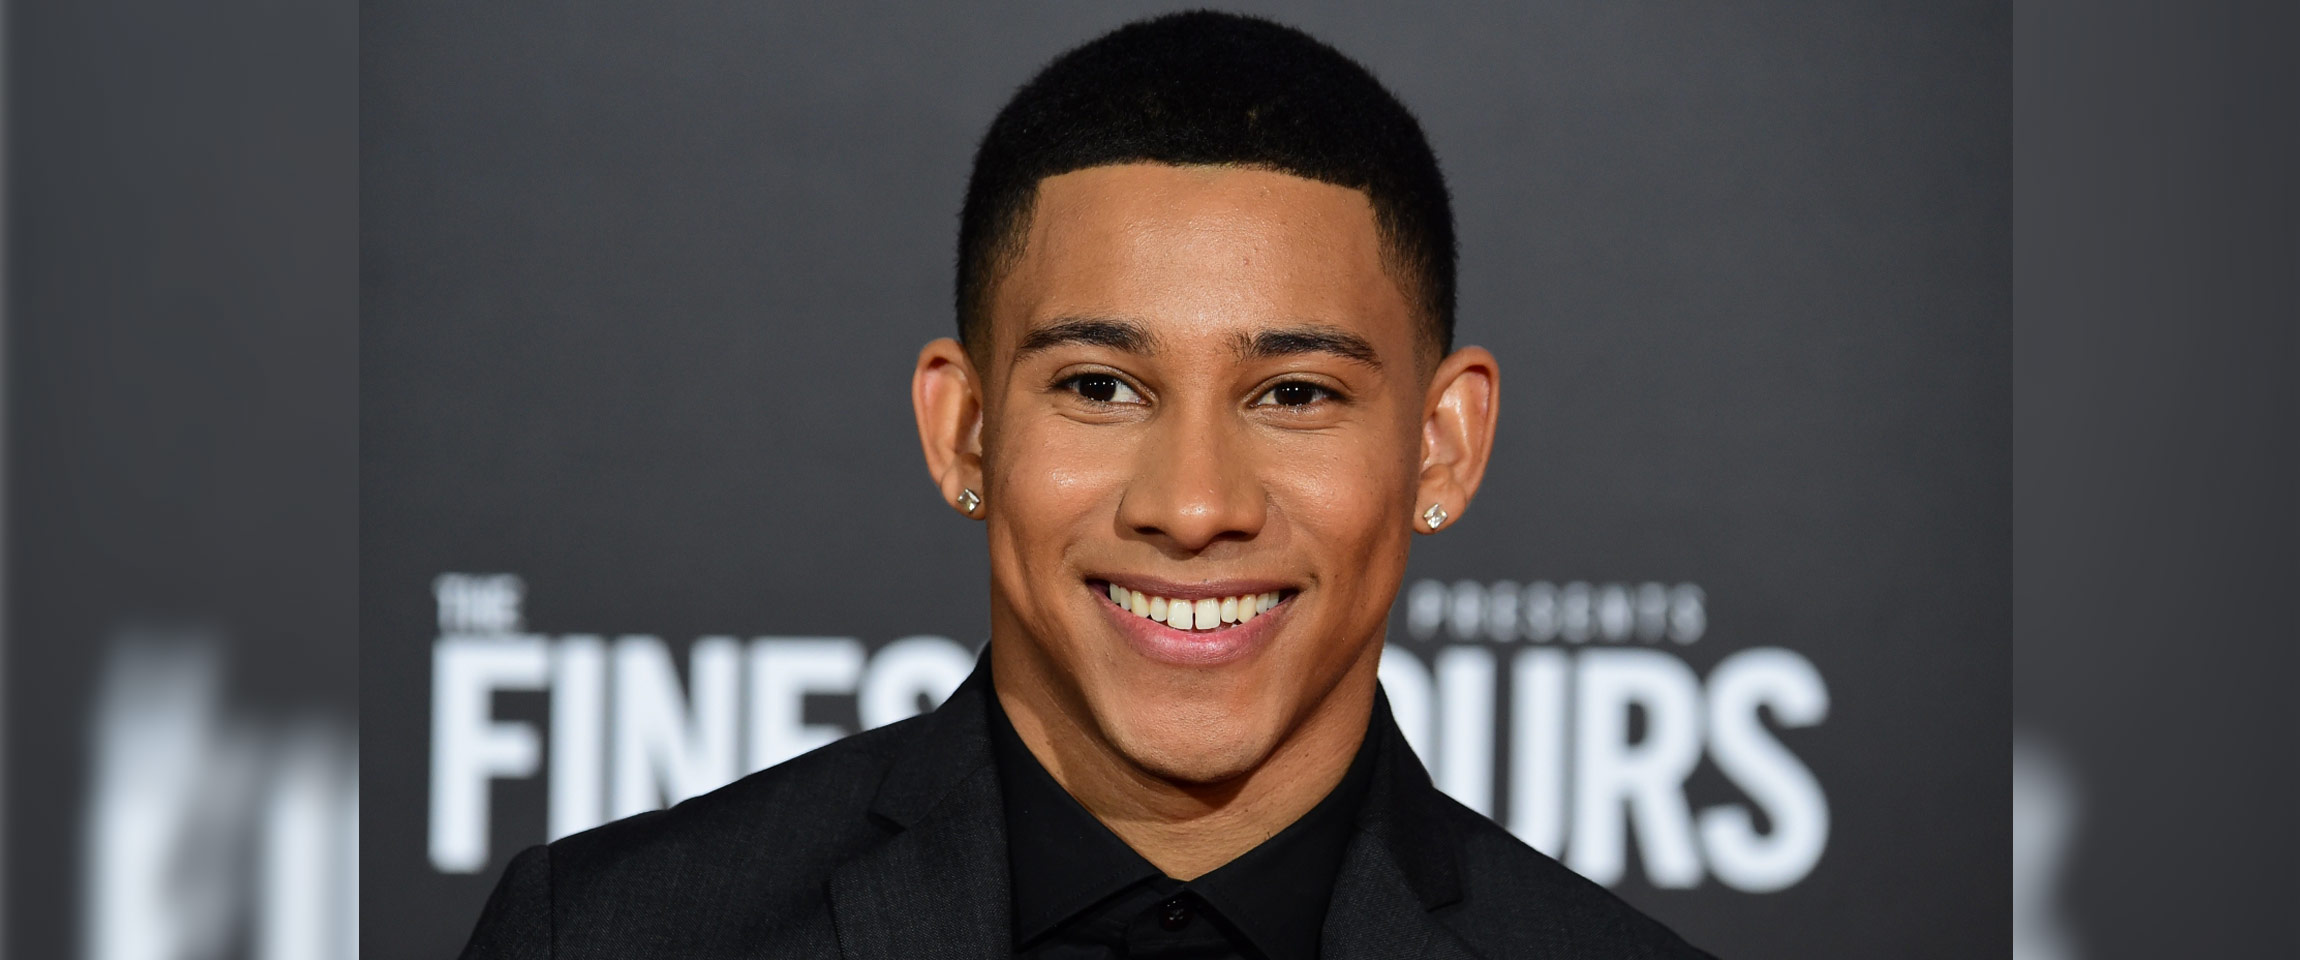 Keiynan Lonsdale also starred in Disney’s The Finest Hours. (Getty)